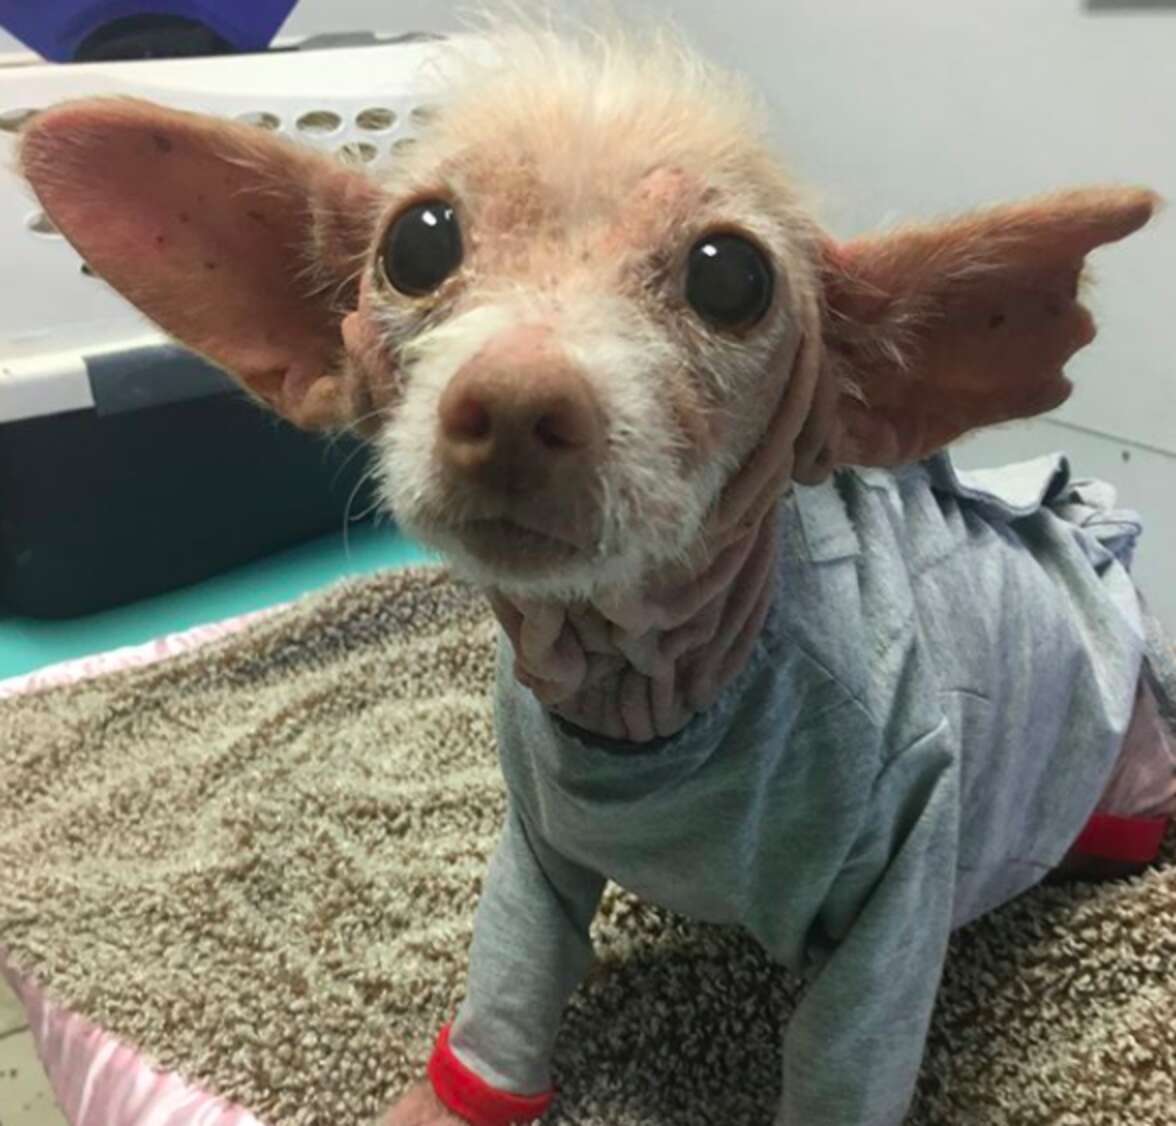 Rescue Dog Is Mostly Bald And No One Knows Why - The Dodo